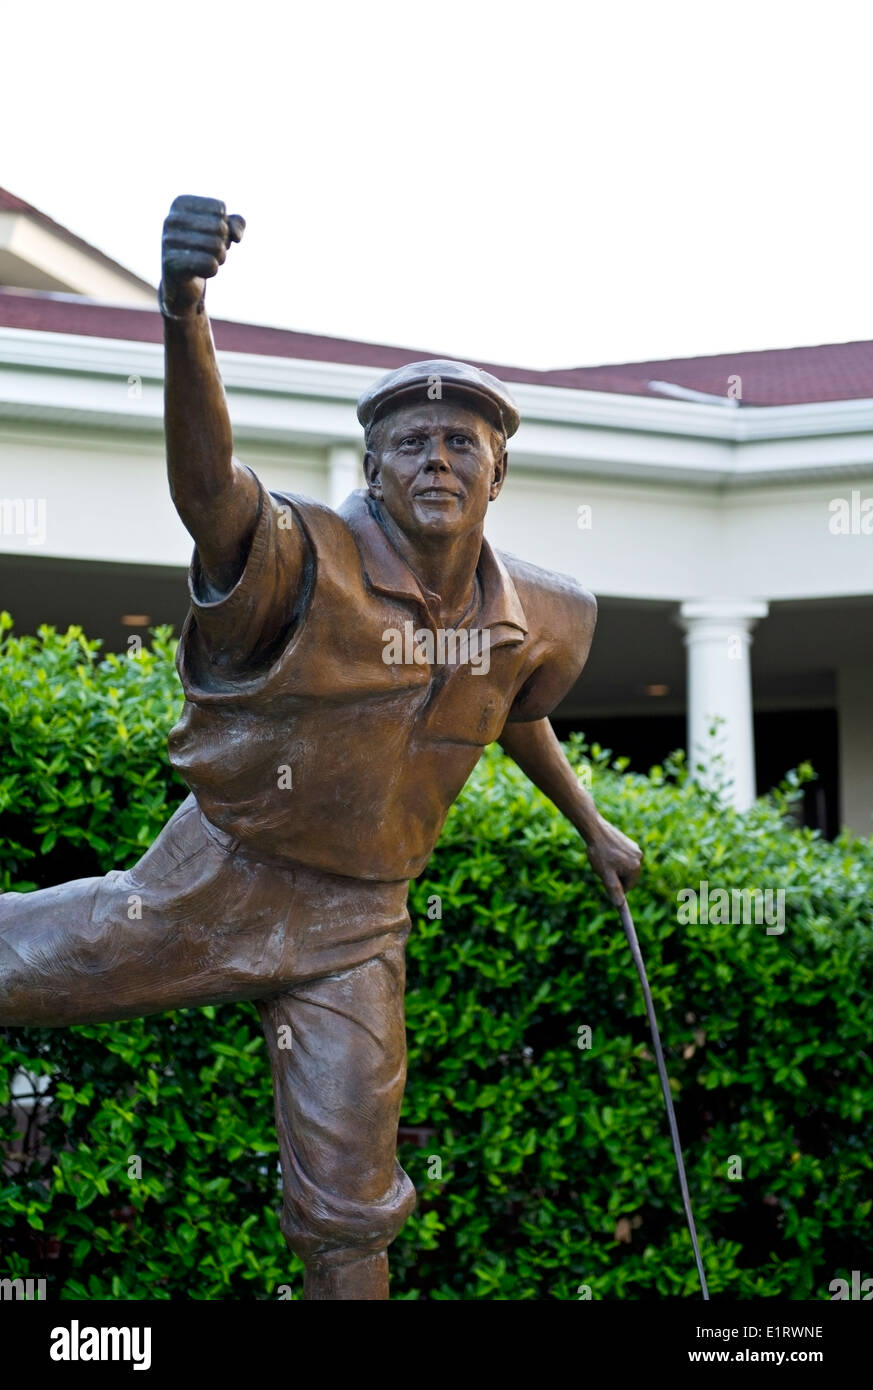 This sculpture of Payne Stewart at Pinehurst Resort depicts Stewart in his winning pose on the 18th hole at the 1999 U.S. Open Stock Photo